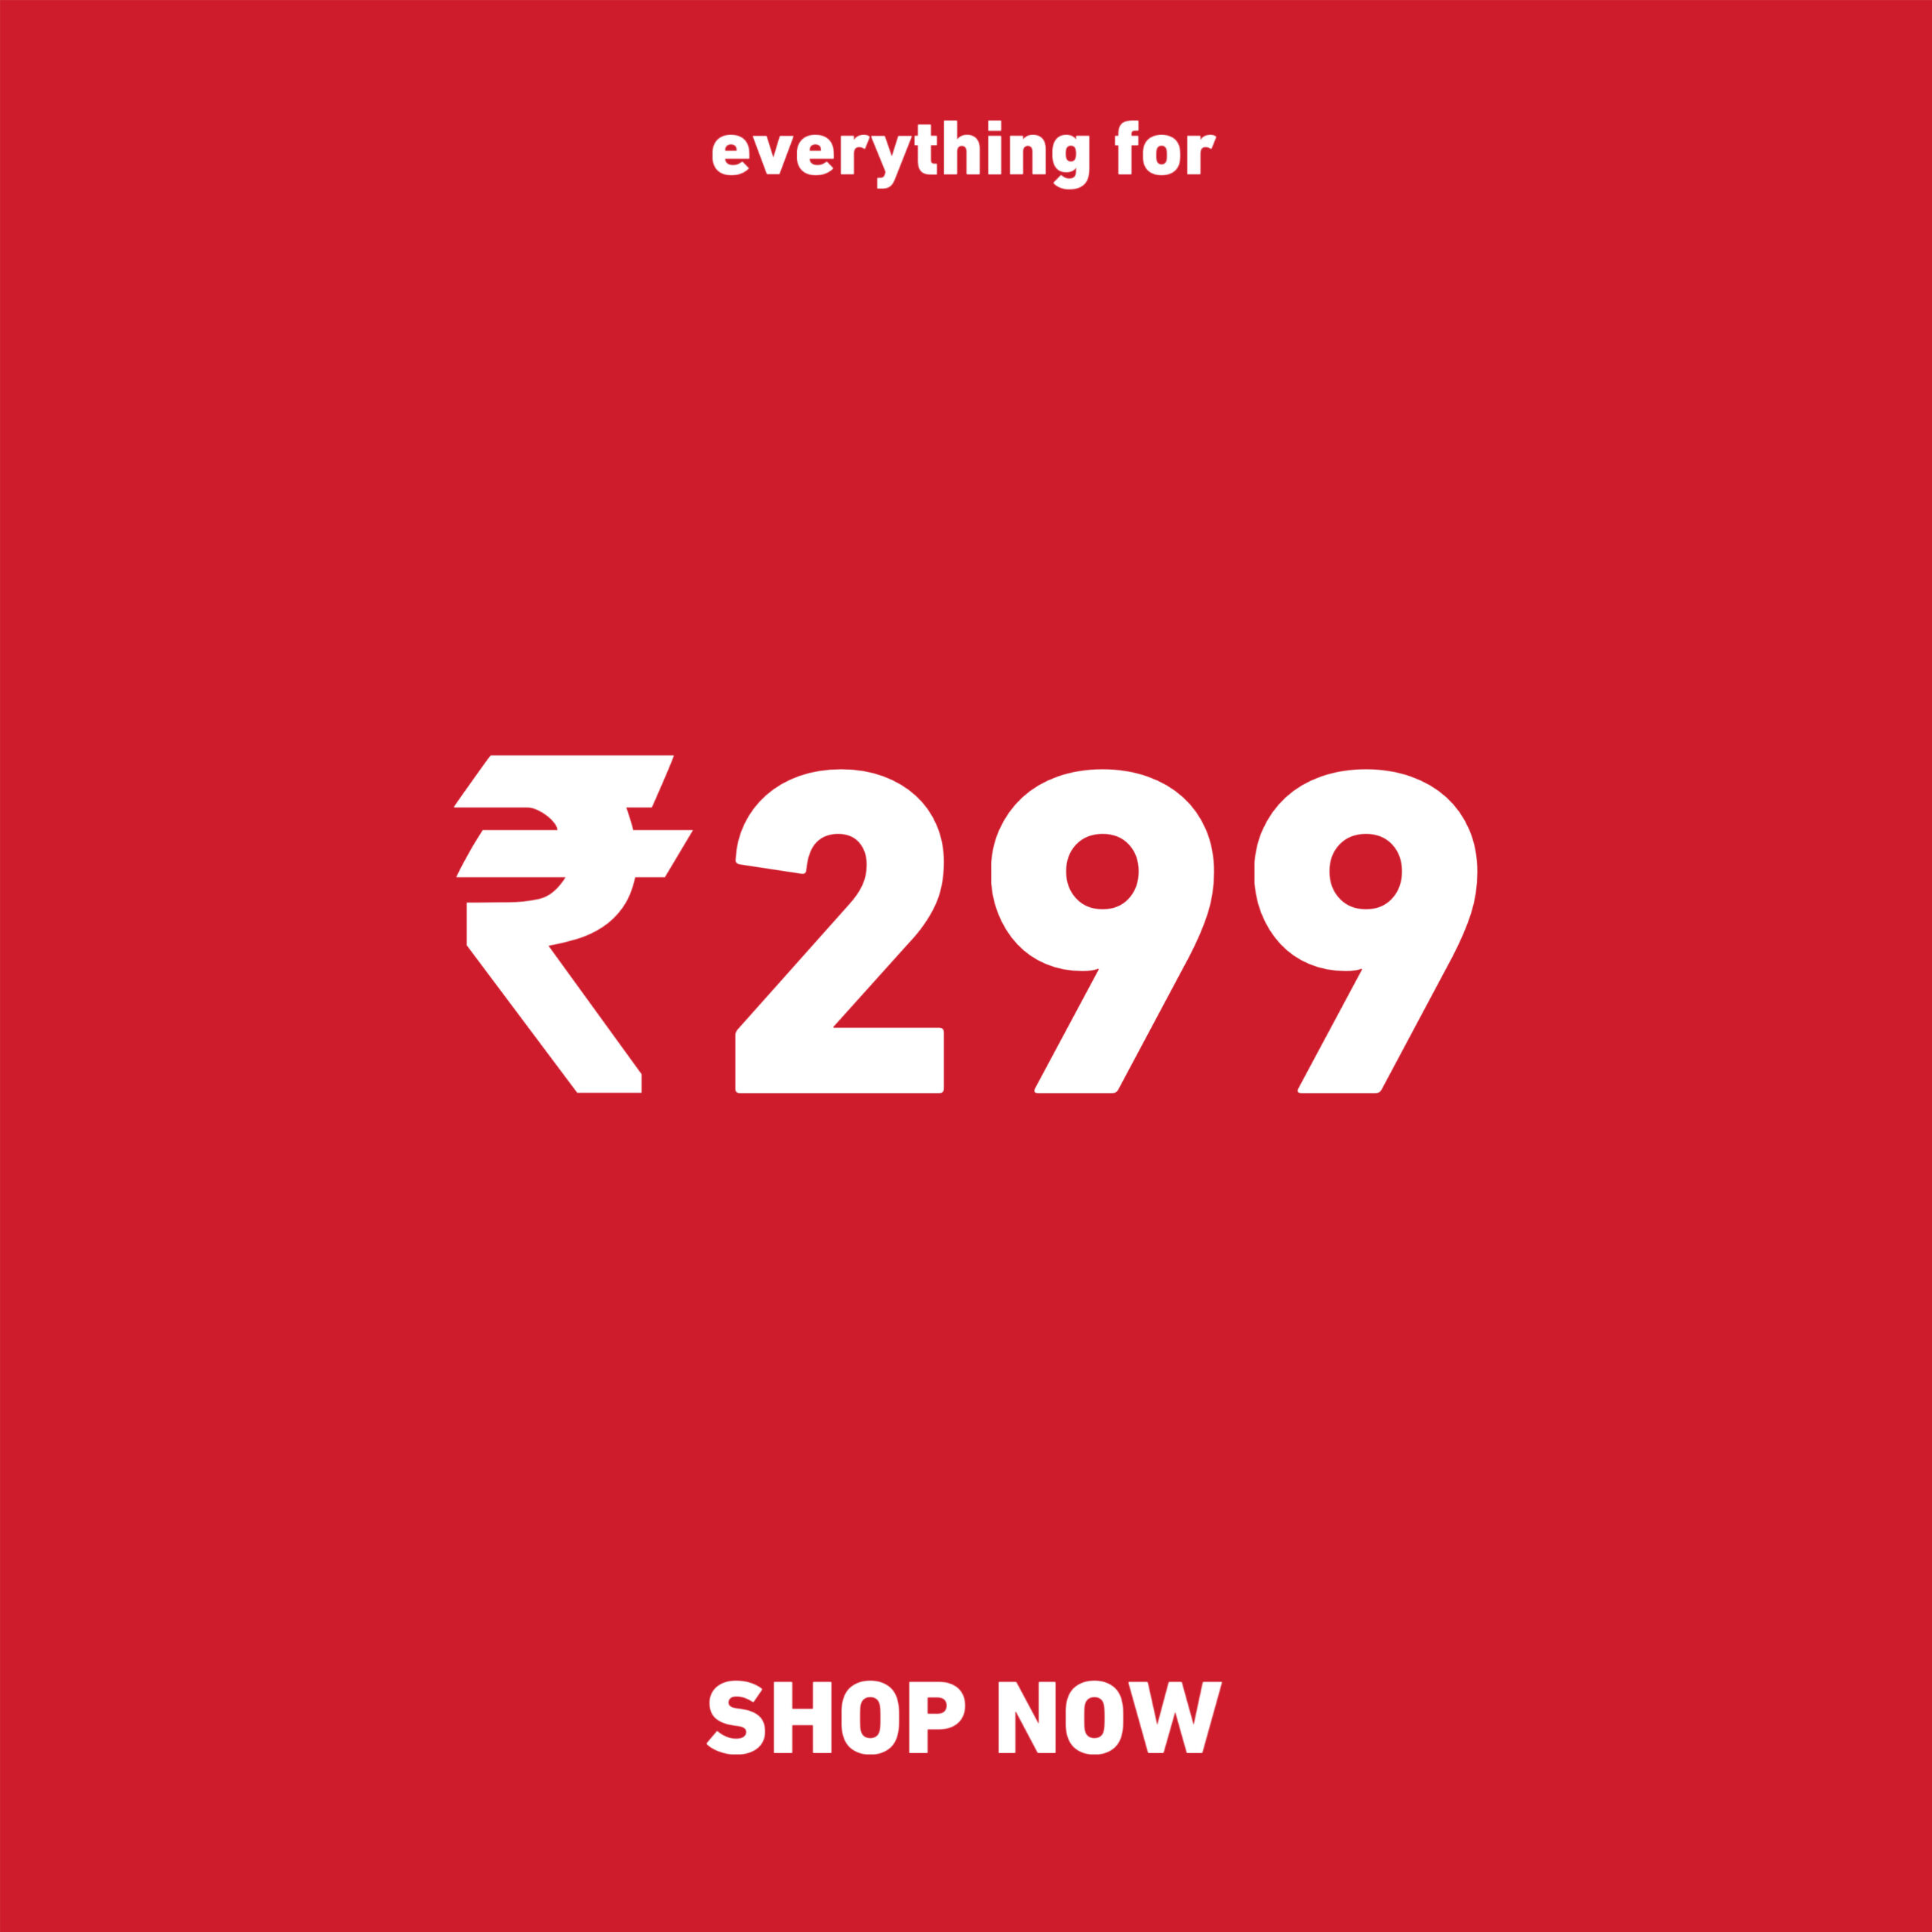 EVERYTHING FOR ₹299